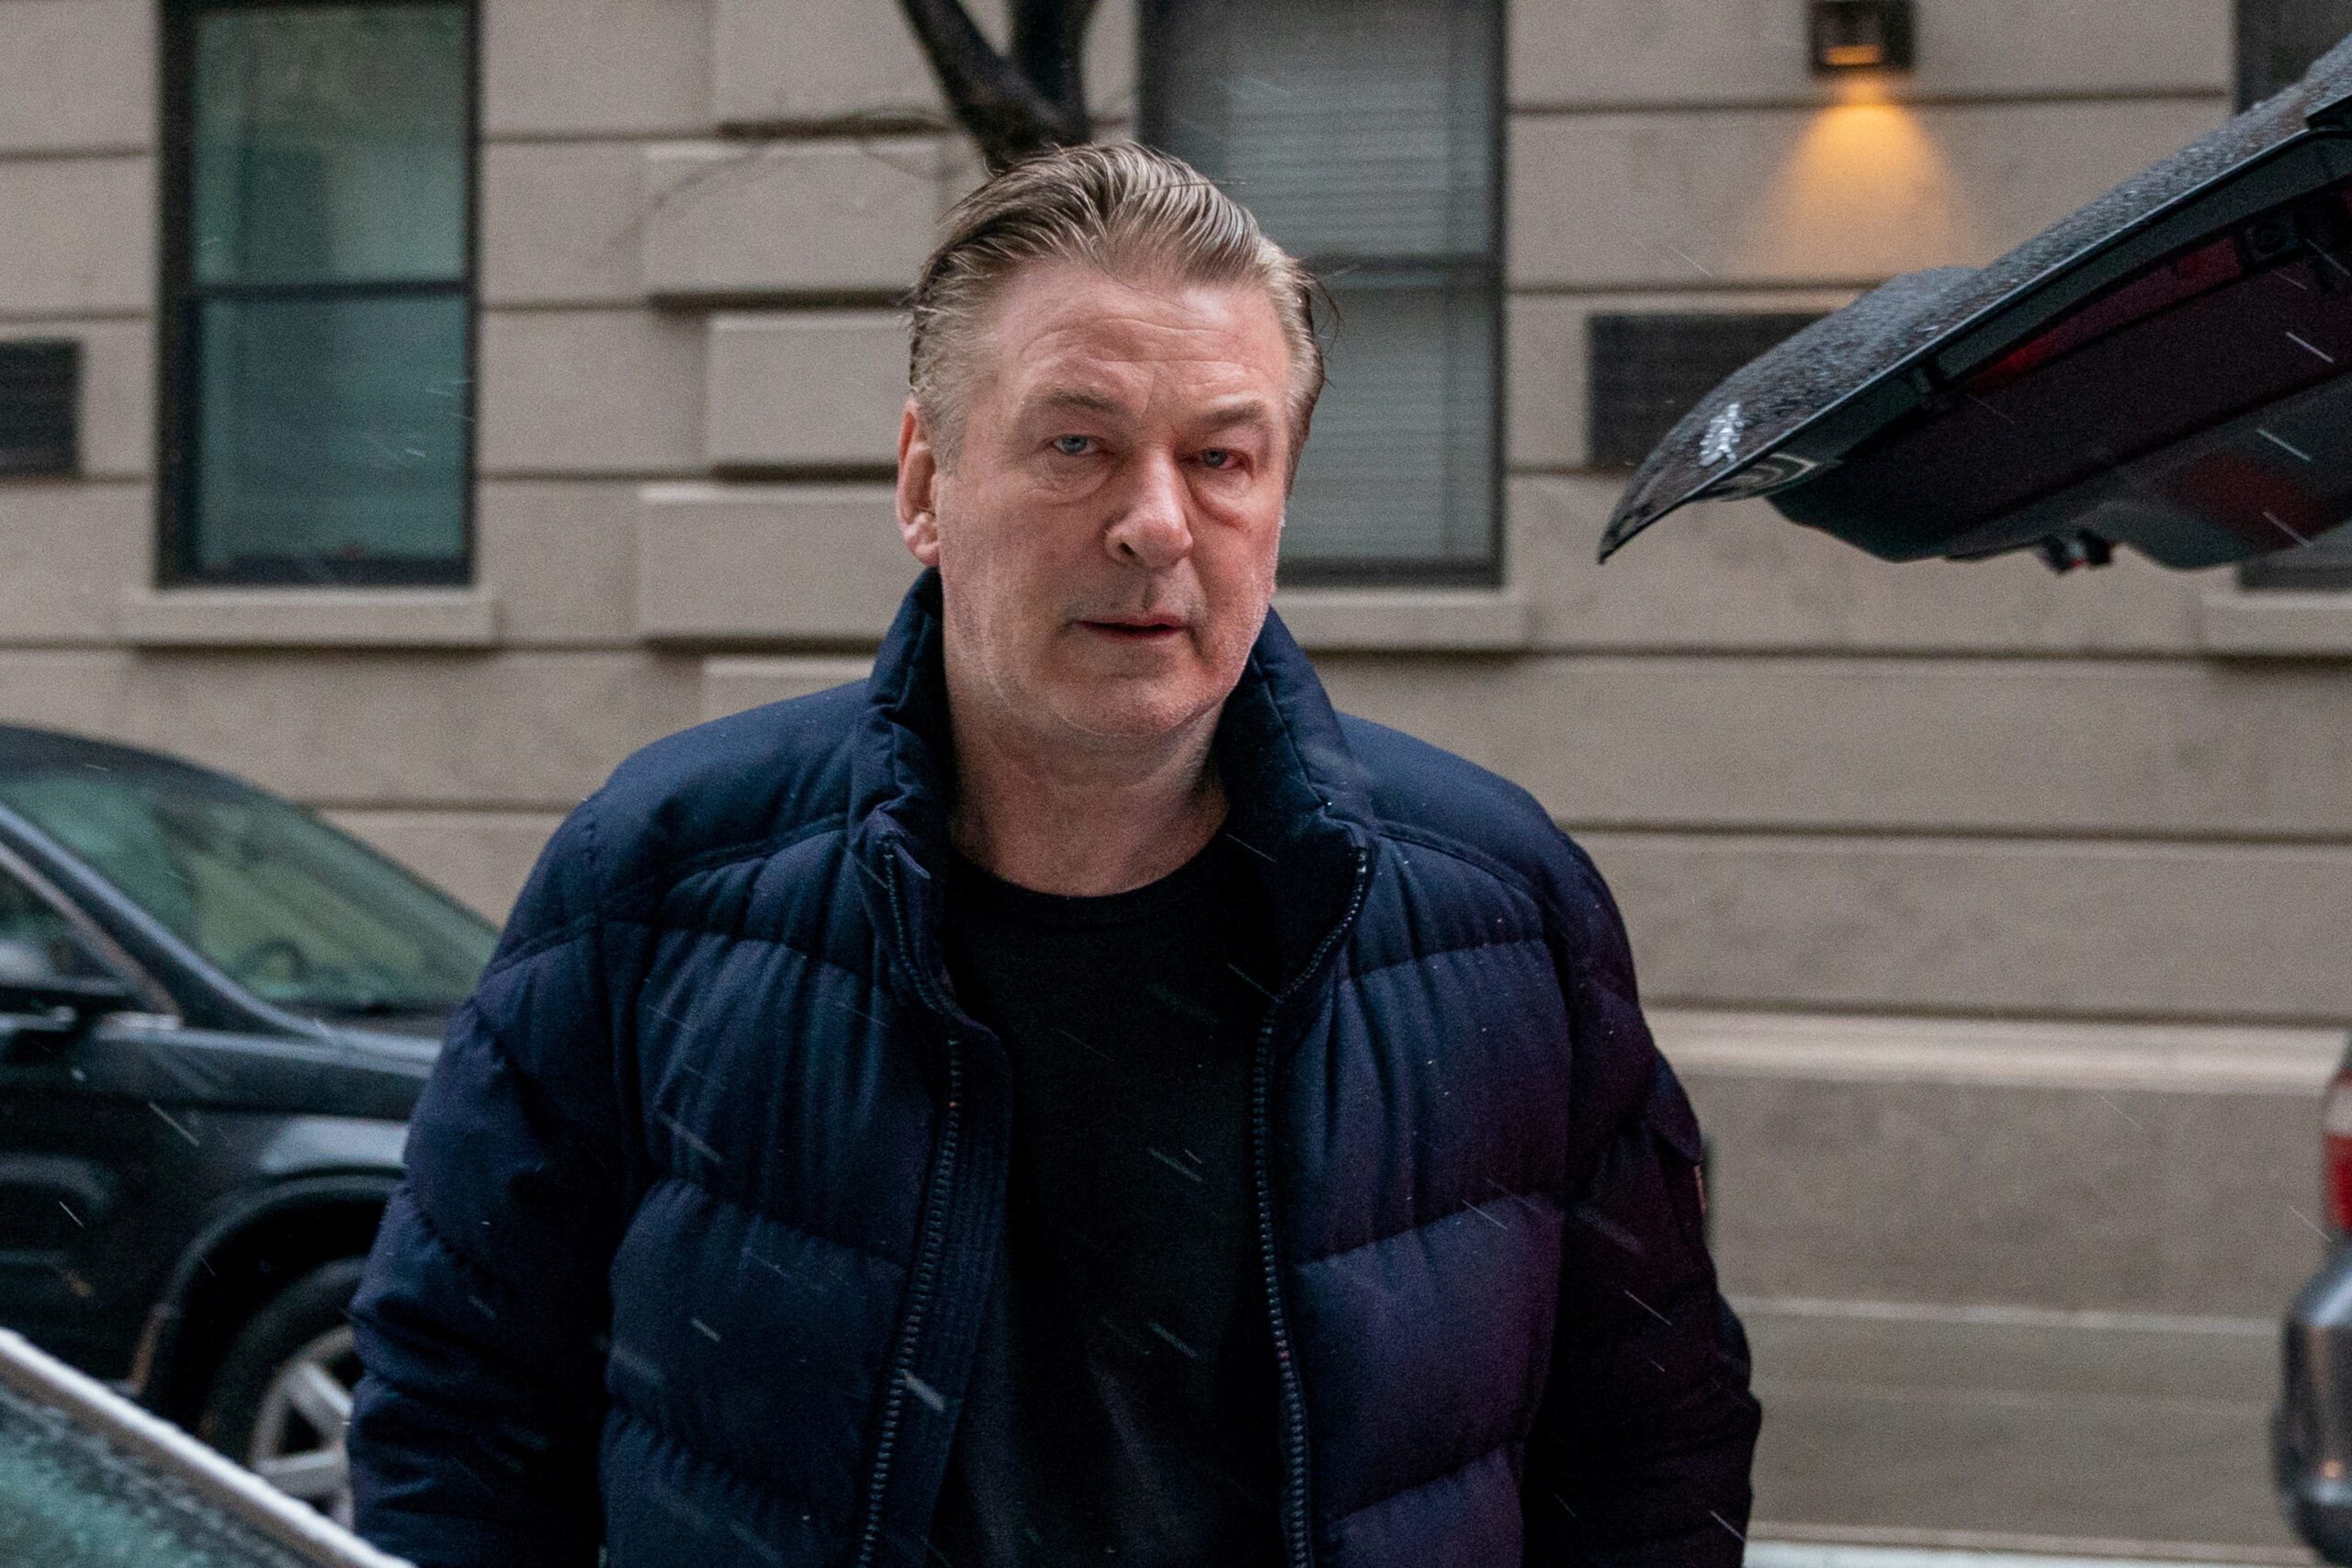 Alec Baldwin pleads not guilty to manslaughter charge in ‘Rust’ shooting